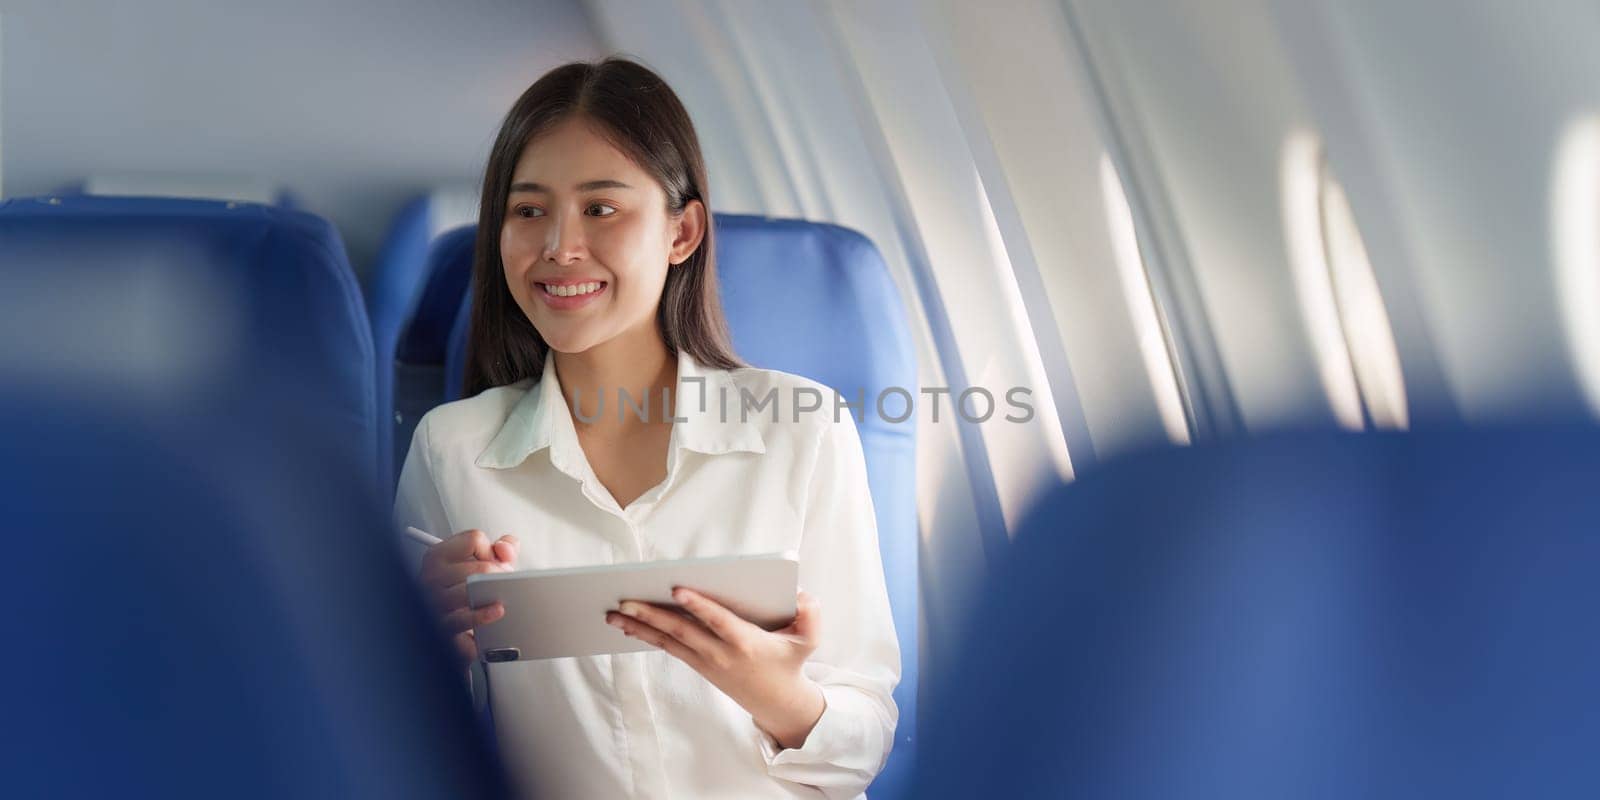 Beautiful Asian businesswoman working with digital tablet in aeroplane. working, travel, business concept by itchaznong